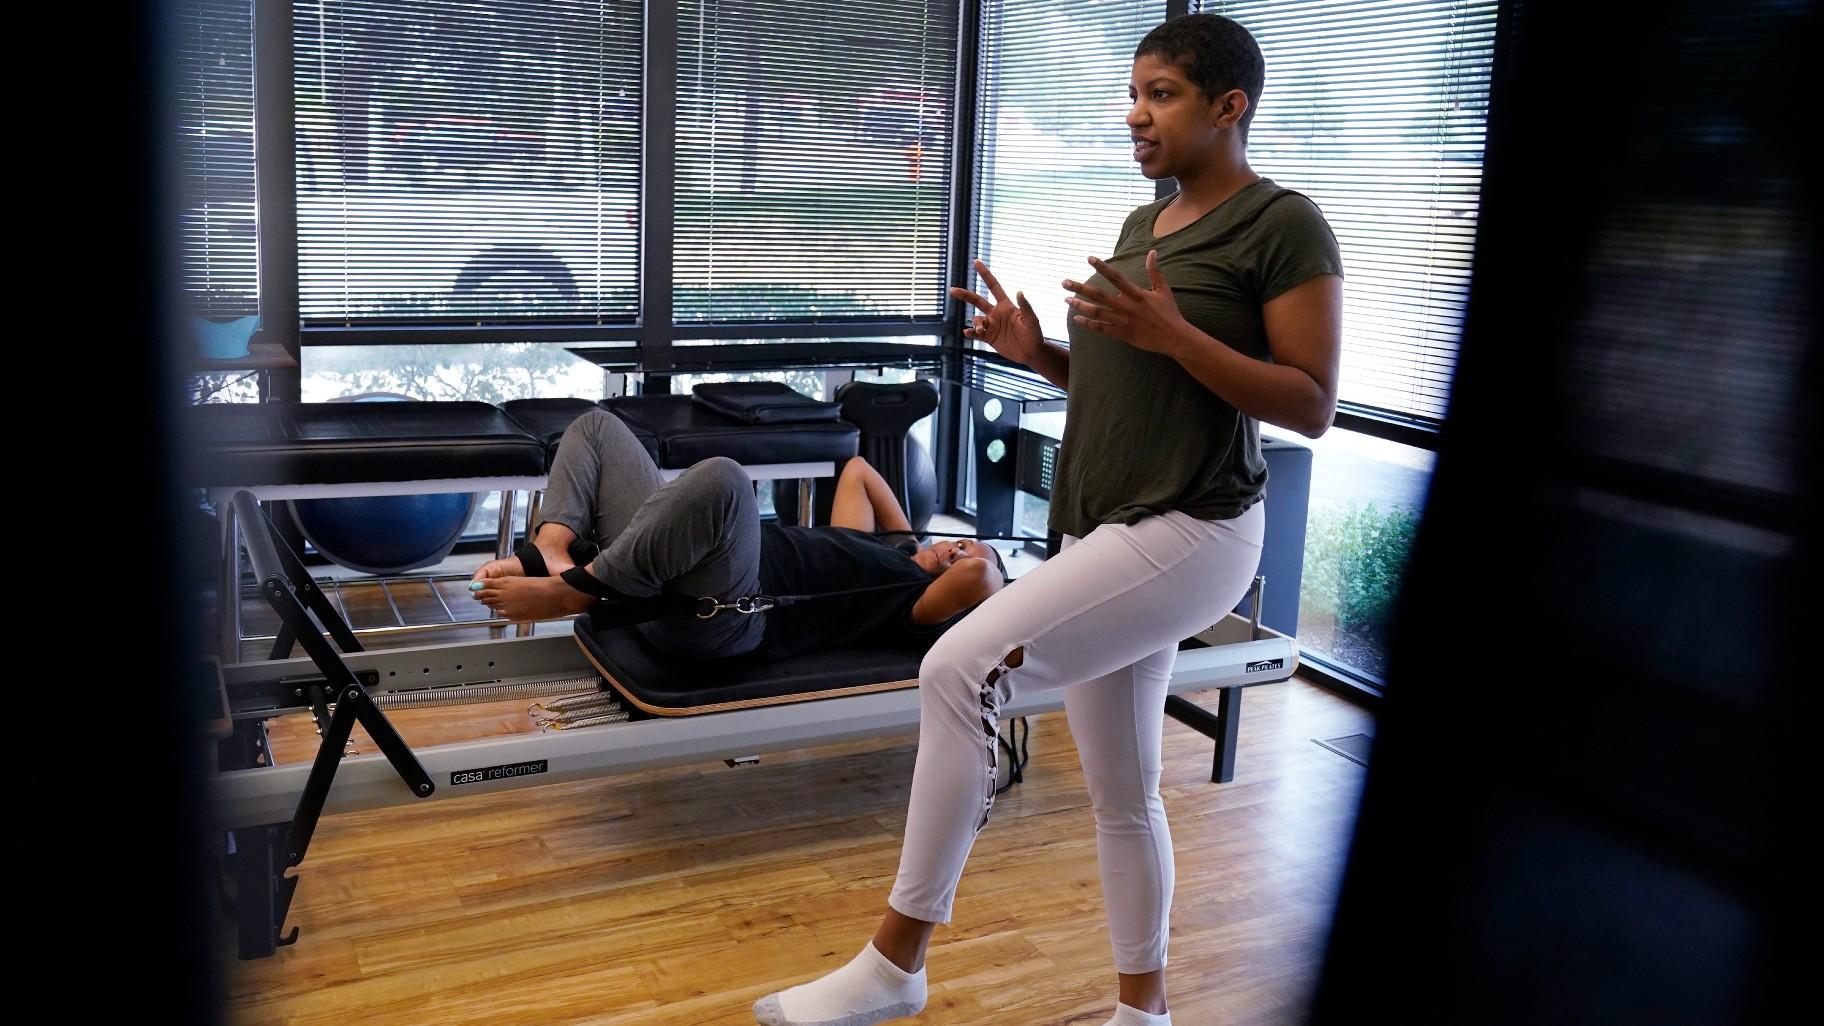 Healthcare instructor Aolion Doxie, right, works with Jamila Thomas at Naperville Wellness & Salt Cave in Naperville, Ill., Thursday, June 8, 2023. (AP Photo / Nam Y. Huh)